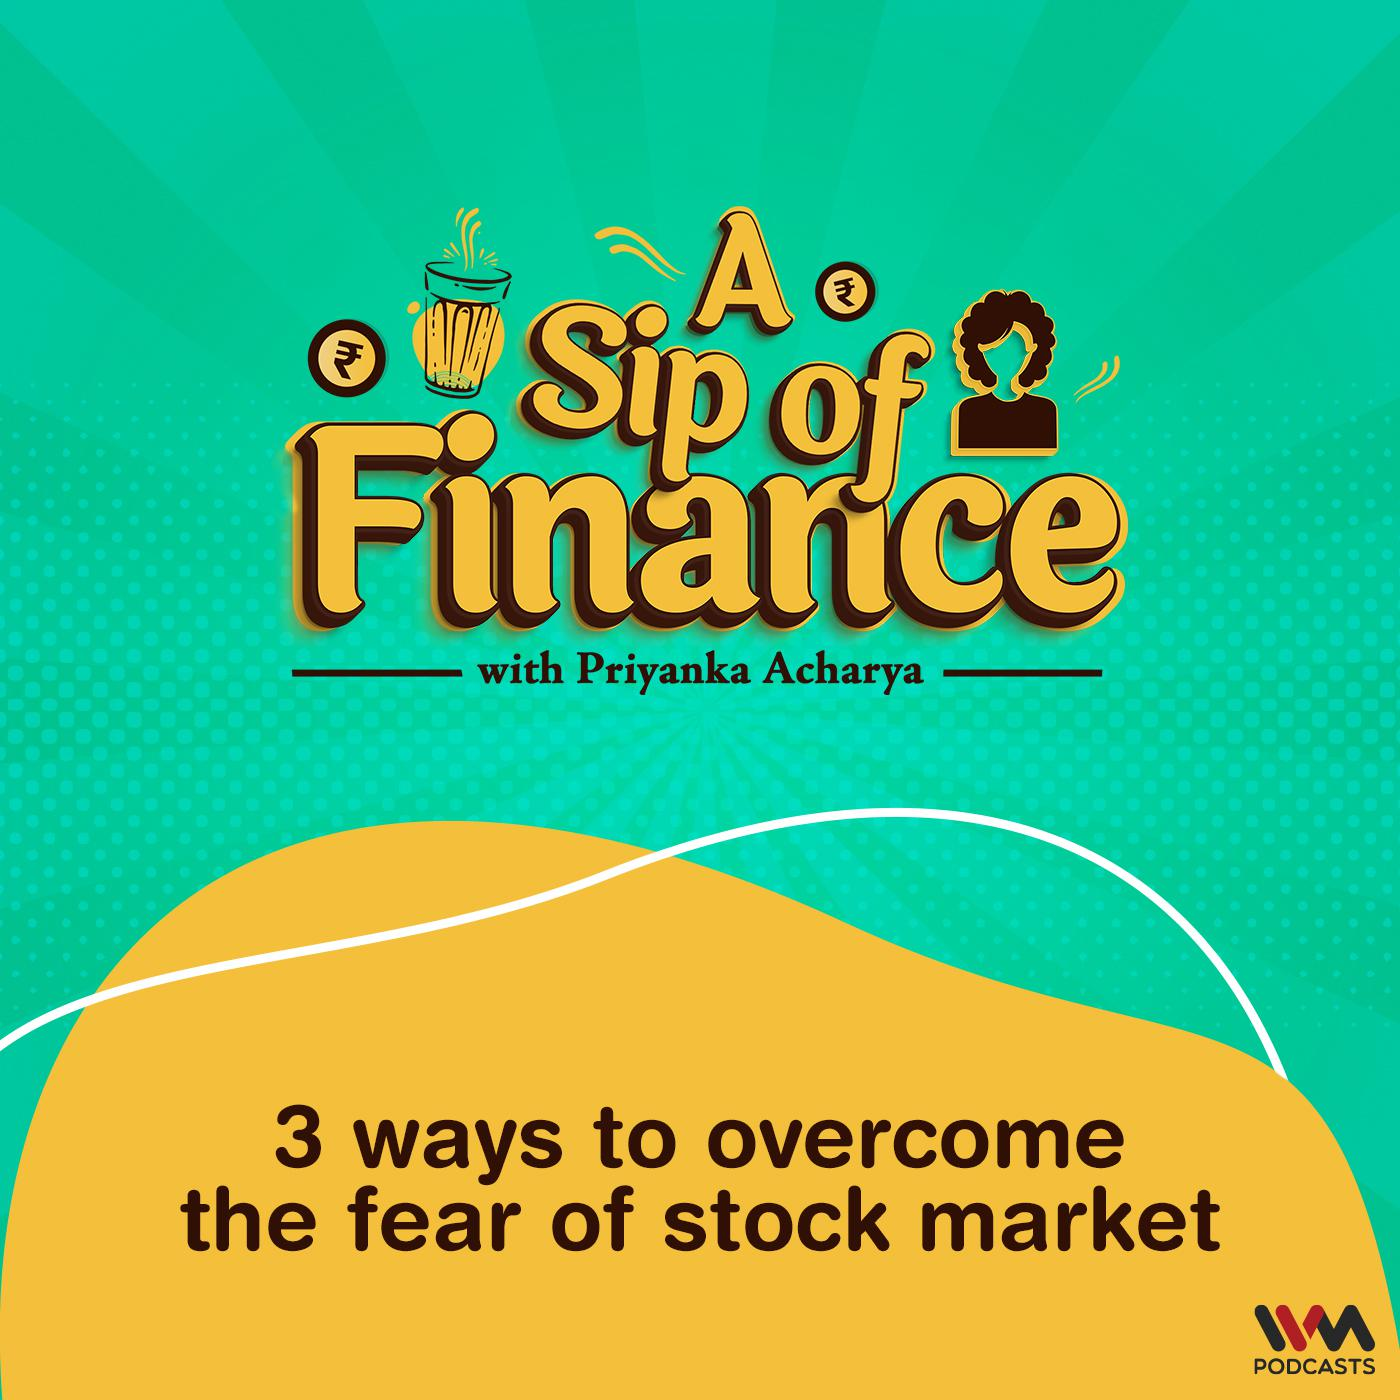 3 ways to overcome the fear of stock market